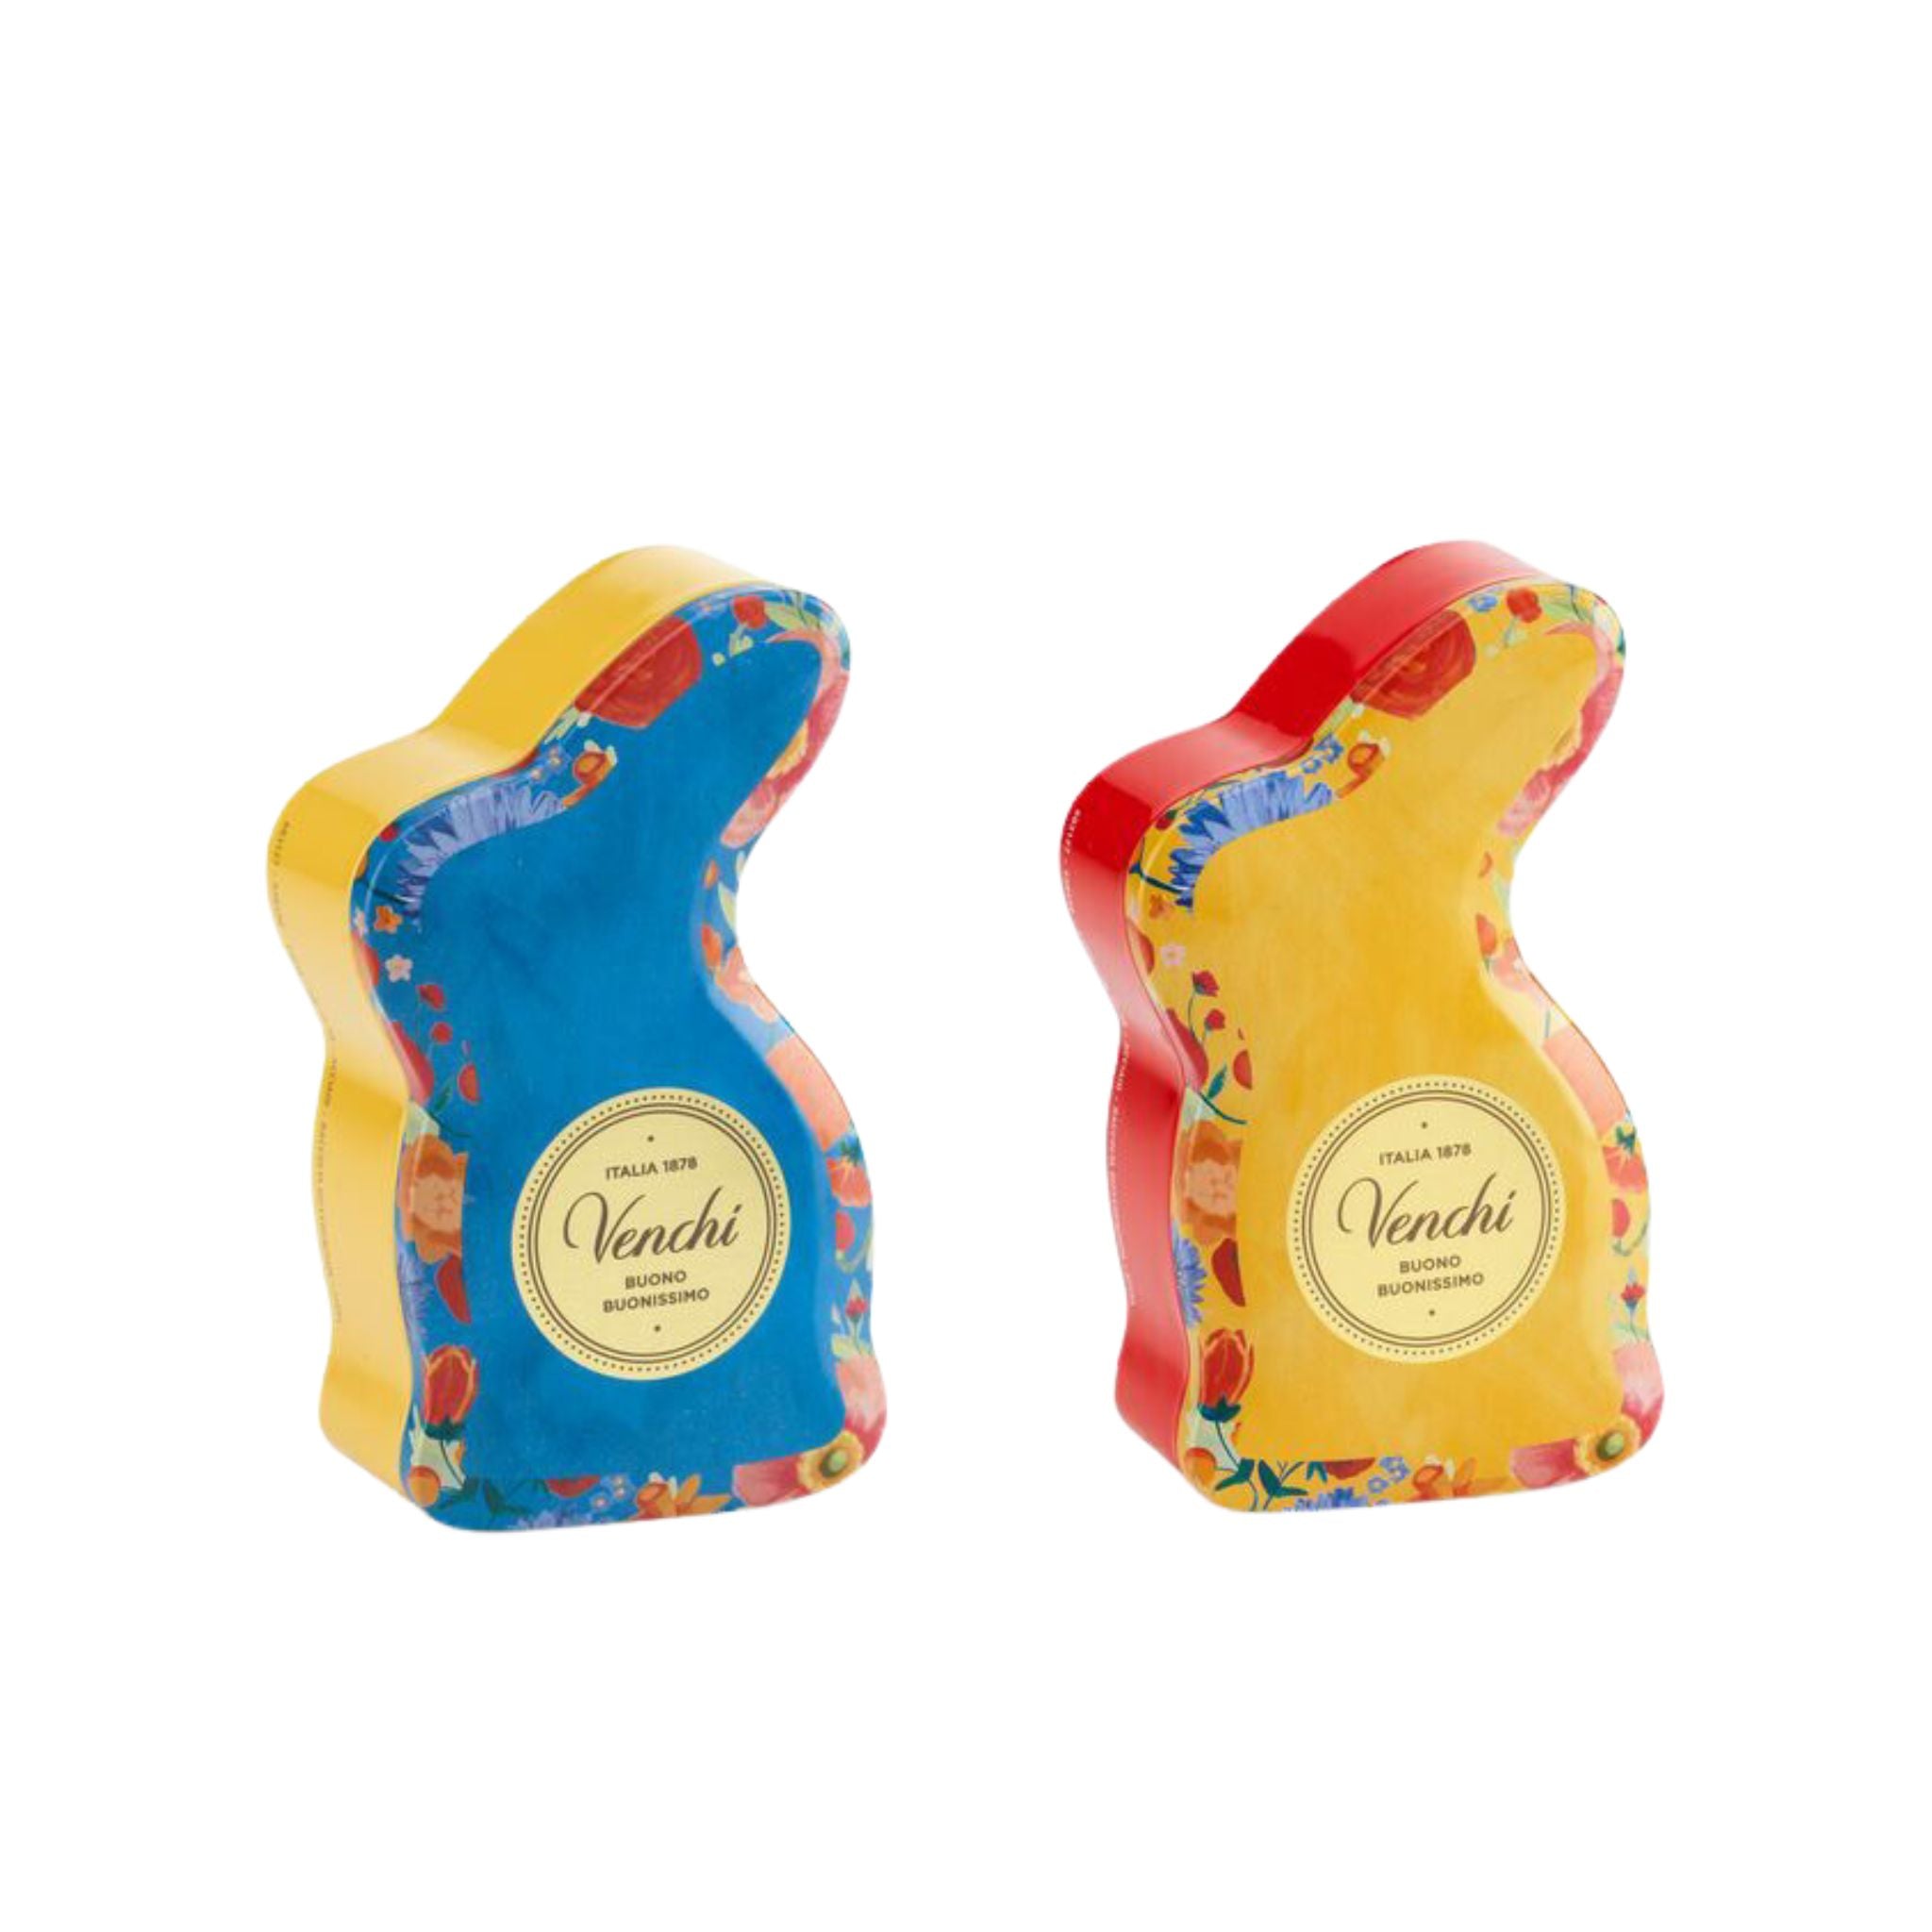 One blue and one yellow Venchi bunny-shaped chocolate gift tin